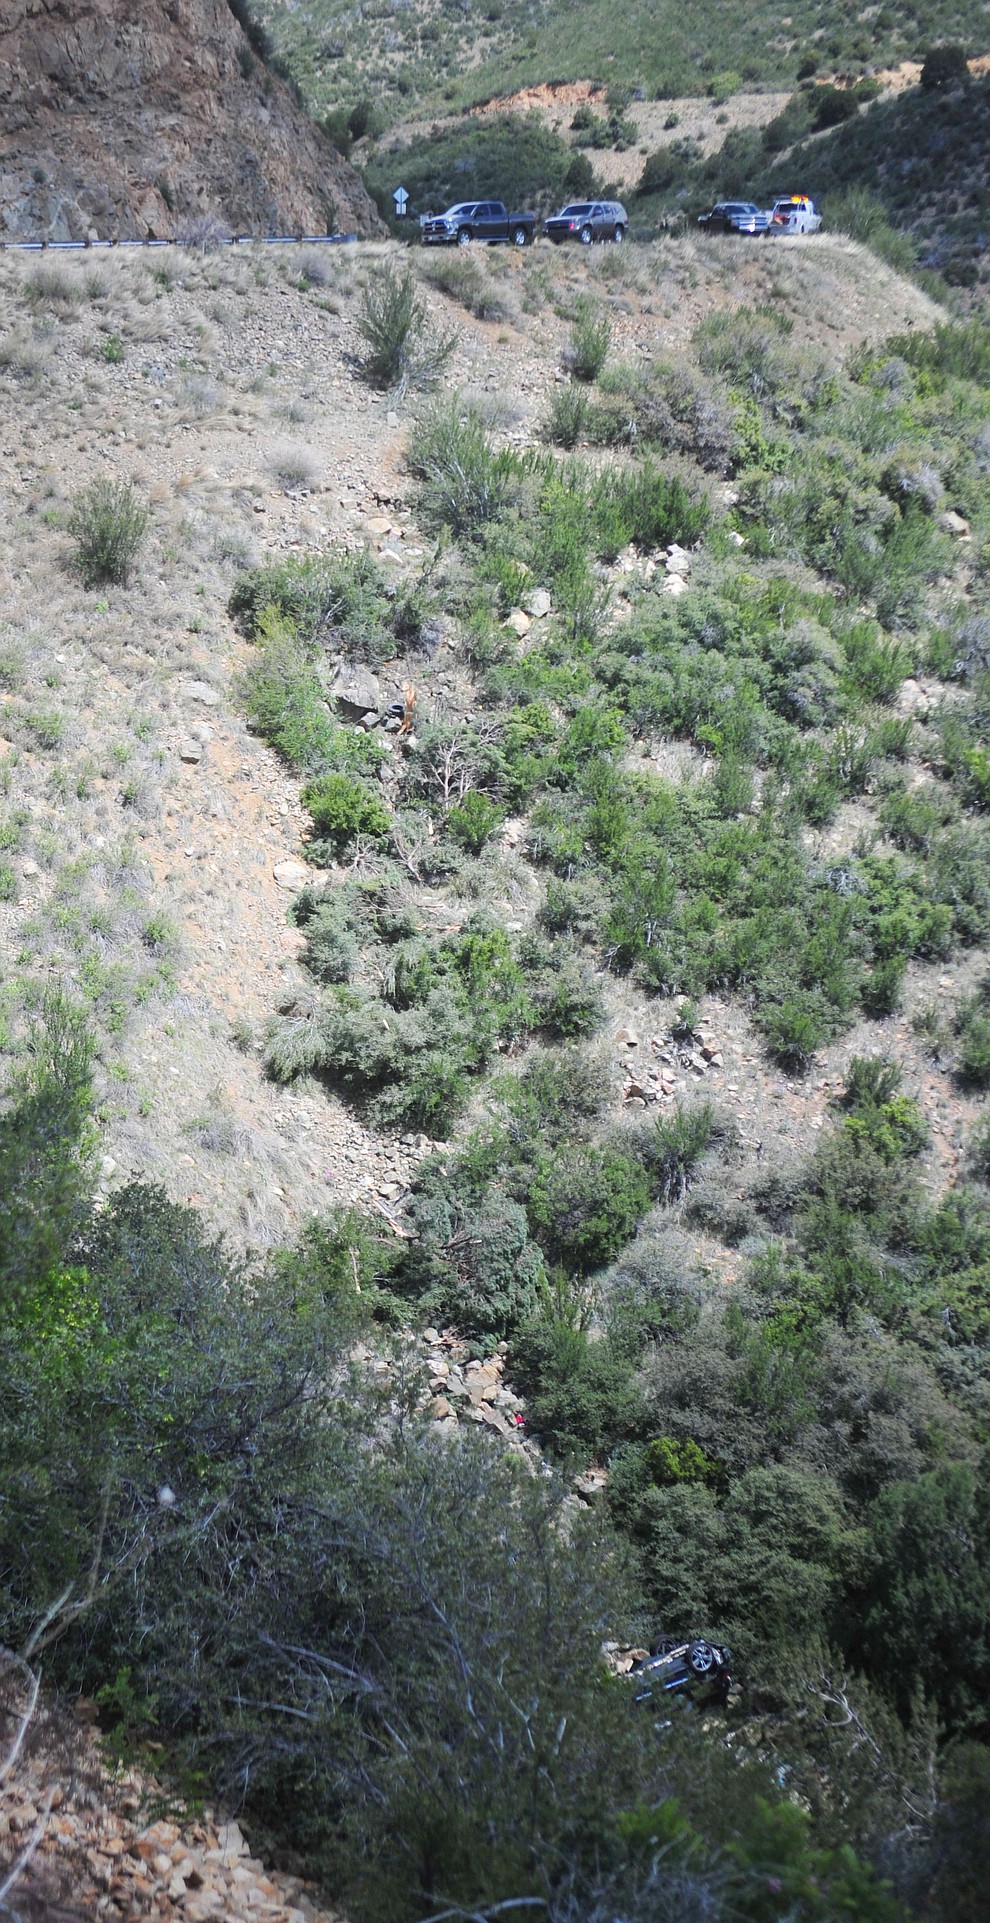 Arizona Department of Public Safety (DPS) investigators are on the scene where a stolen vehicle was run off a cliff at mile marker 303 on Highway 89 Monday, May 28 between Prescott and Wilhoit. The vehicle is approximately 500 feet down a steep hillside, landing in a drainage. (Les Stukenberg/Courier)